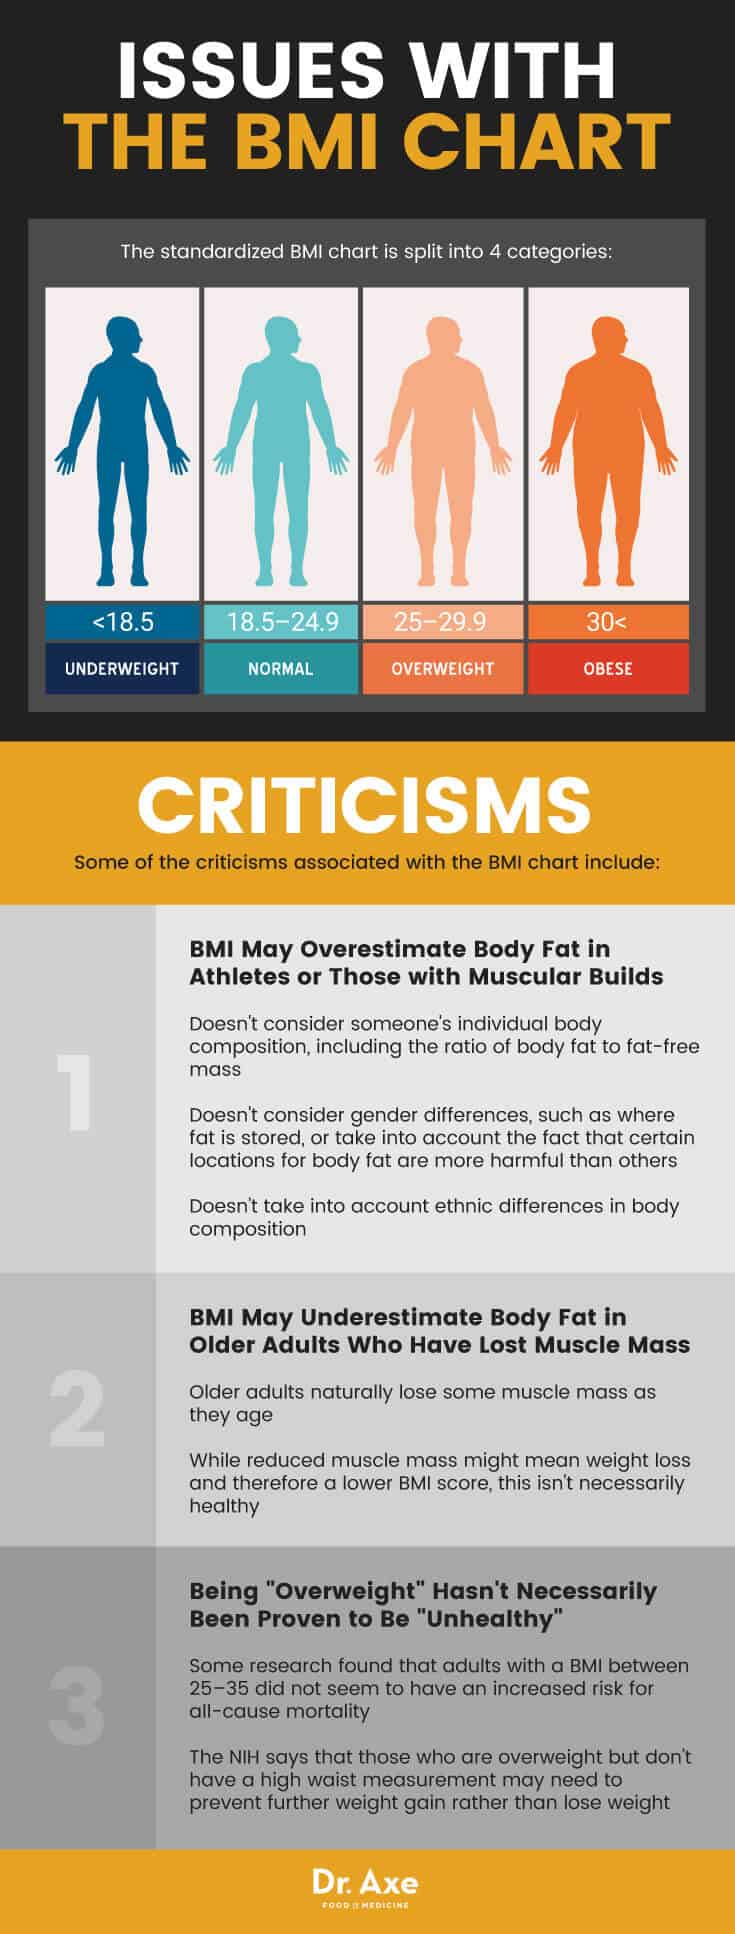 BMI chart issues - Dr. Axe